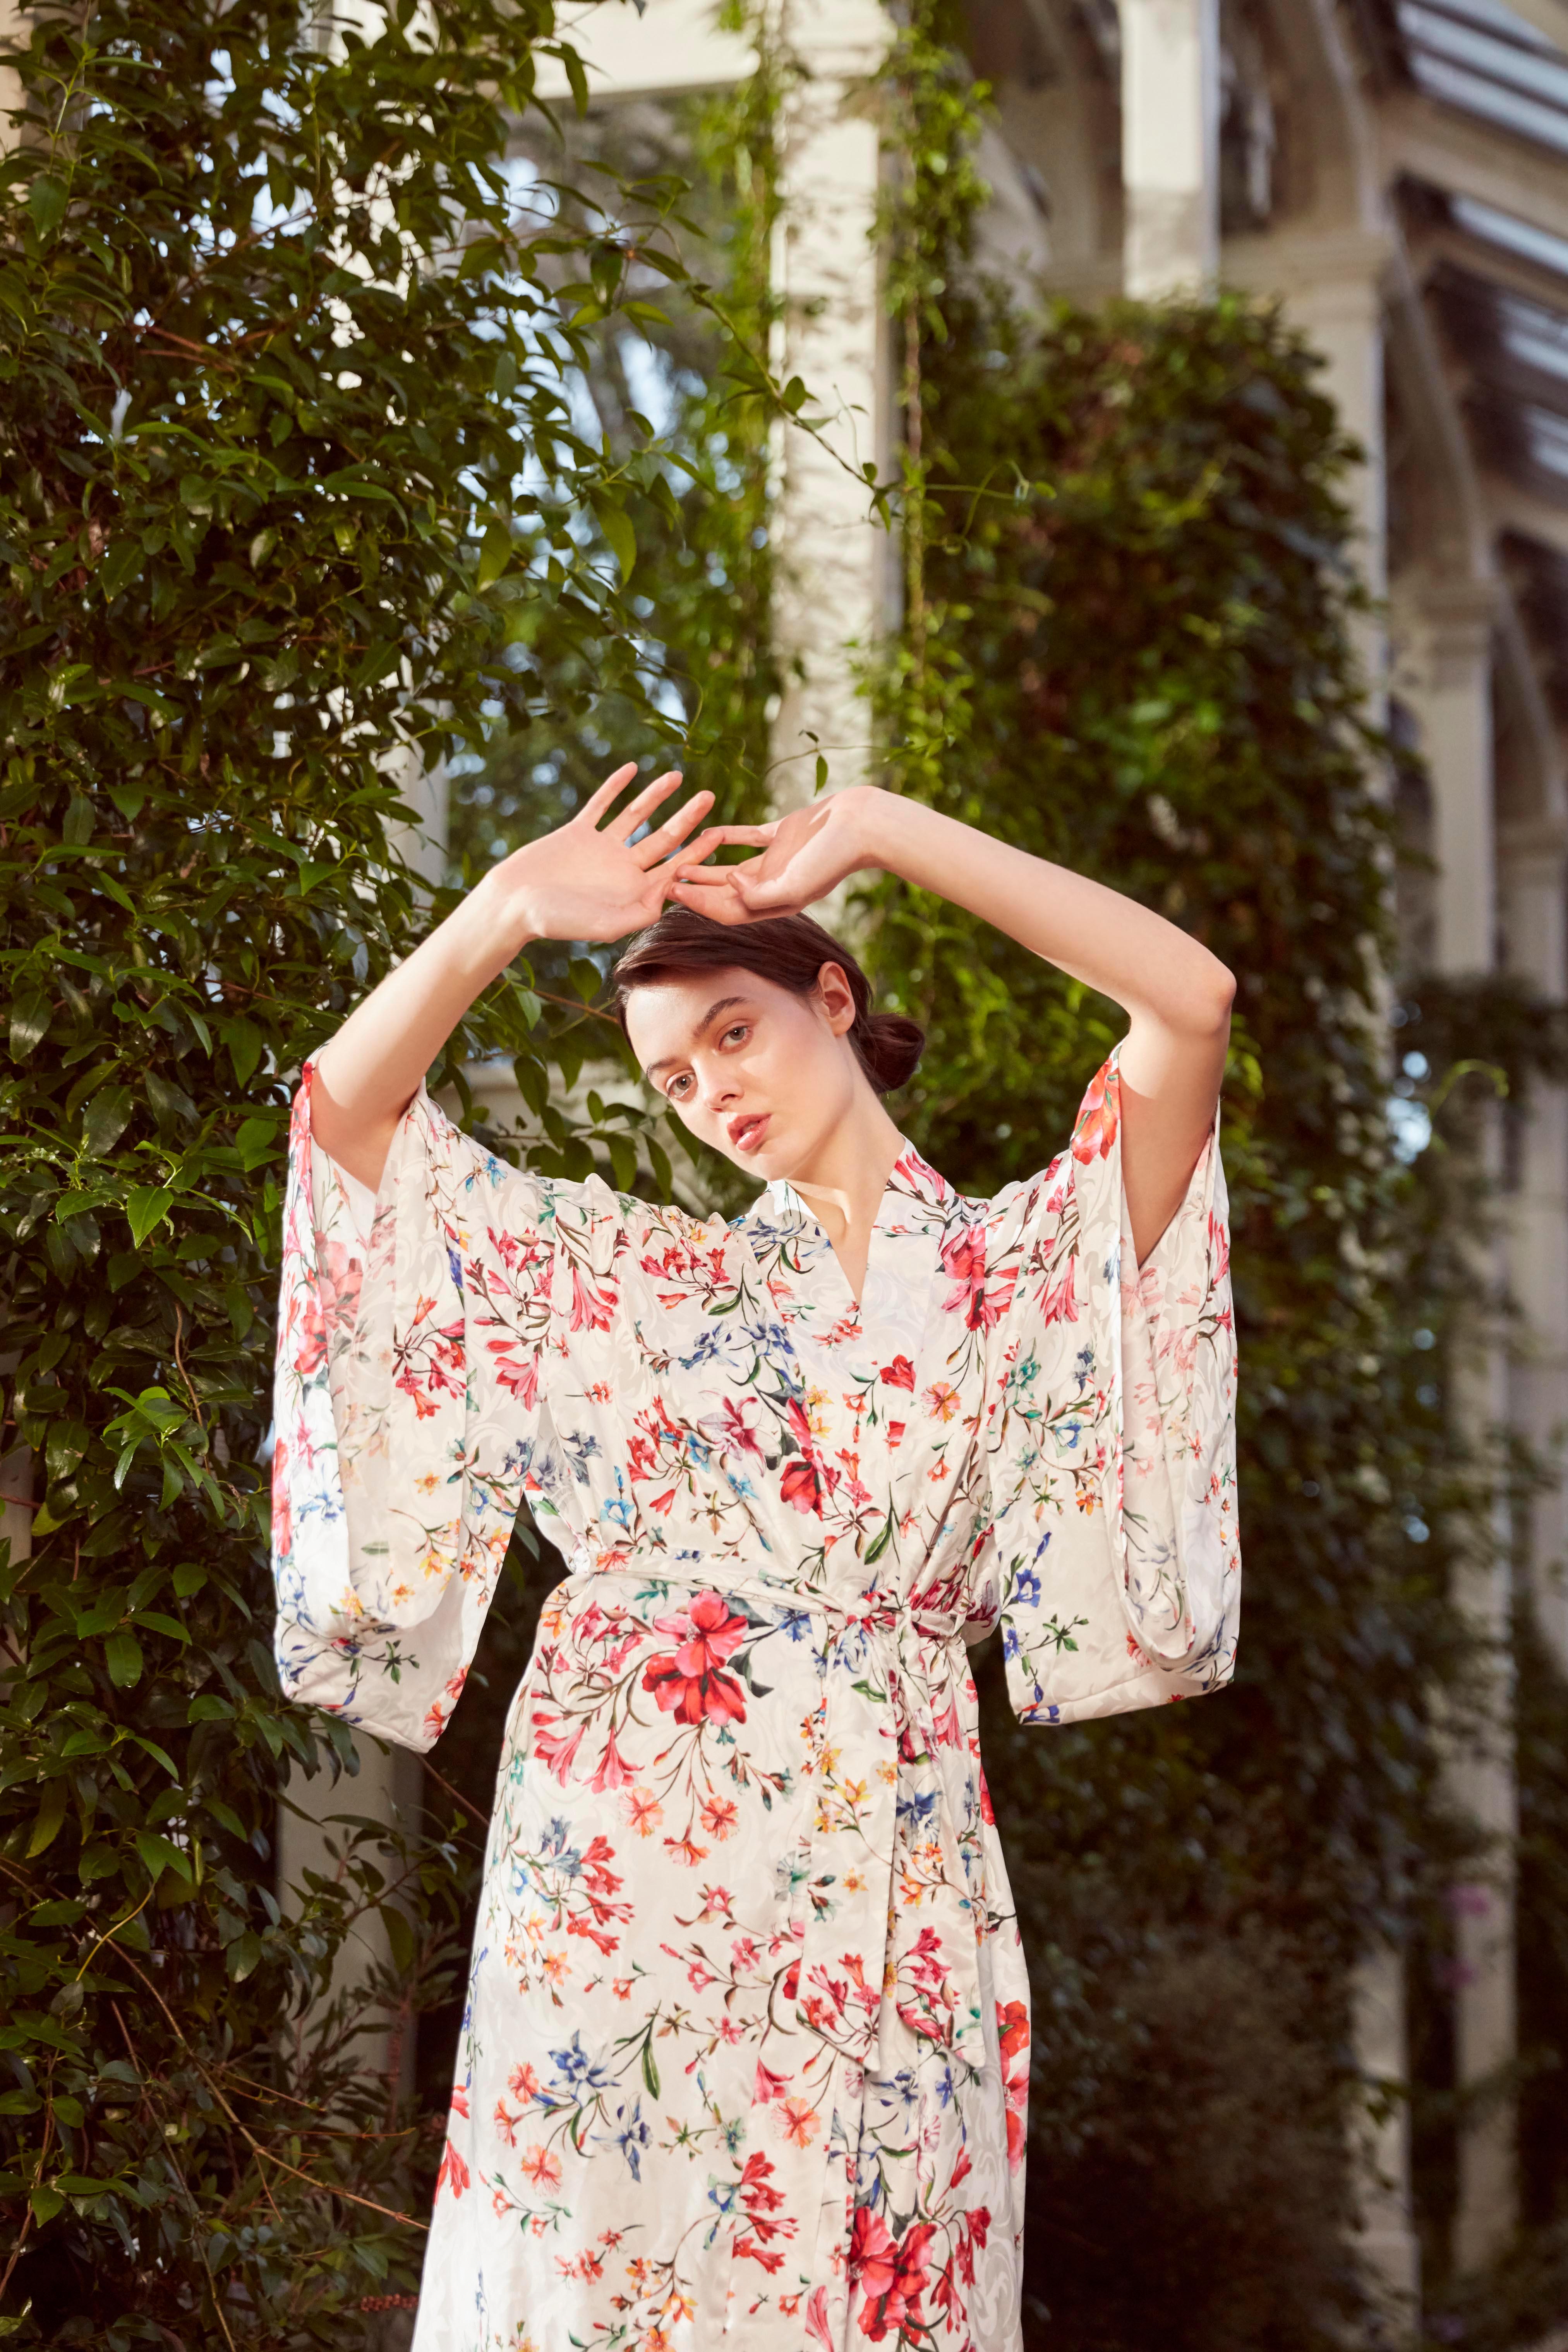 The Verheyen London Kimono is the perfect dress for evening wear or coat dress to wear with a pair of jeans and heels in the evening.  
Handmade in London, made with 100% Italian silk, this luxury item is an investment piece to wear for a lifetime.